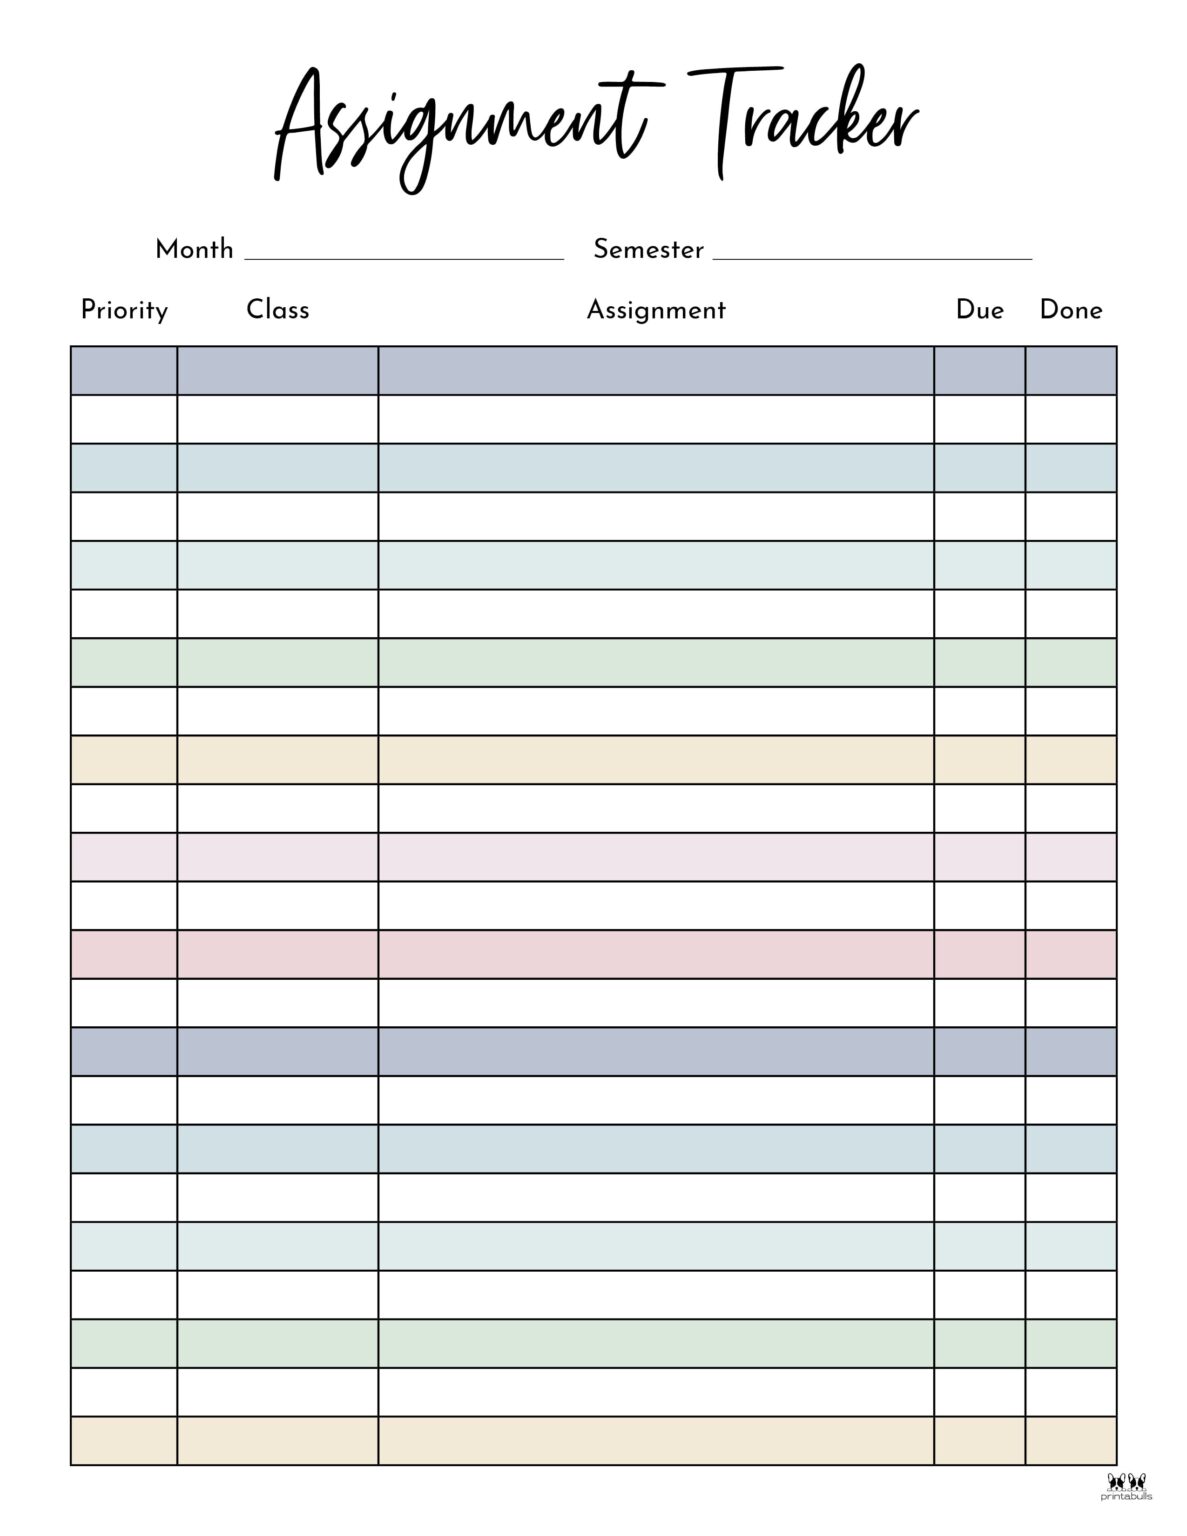 how to make an assignment tracker